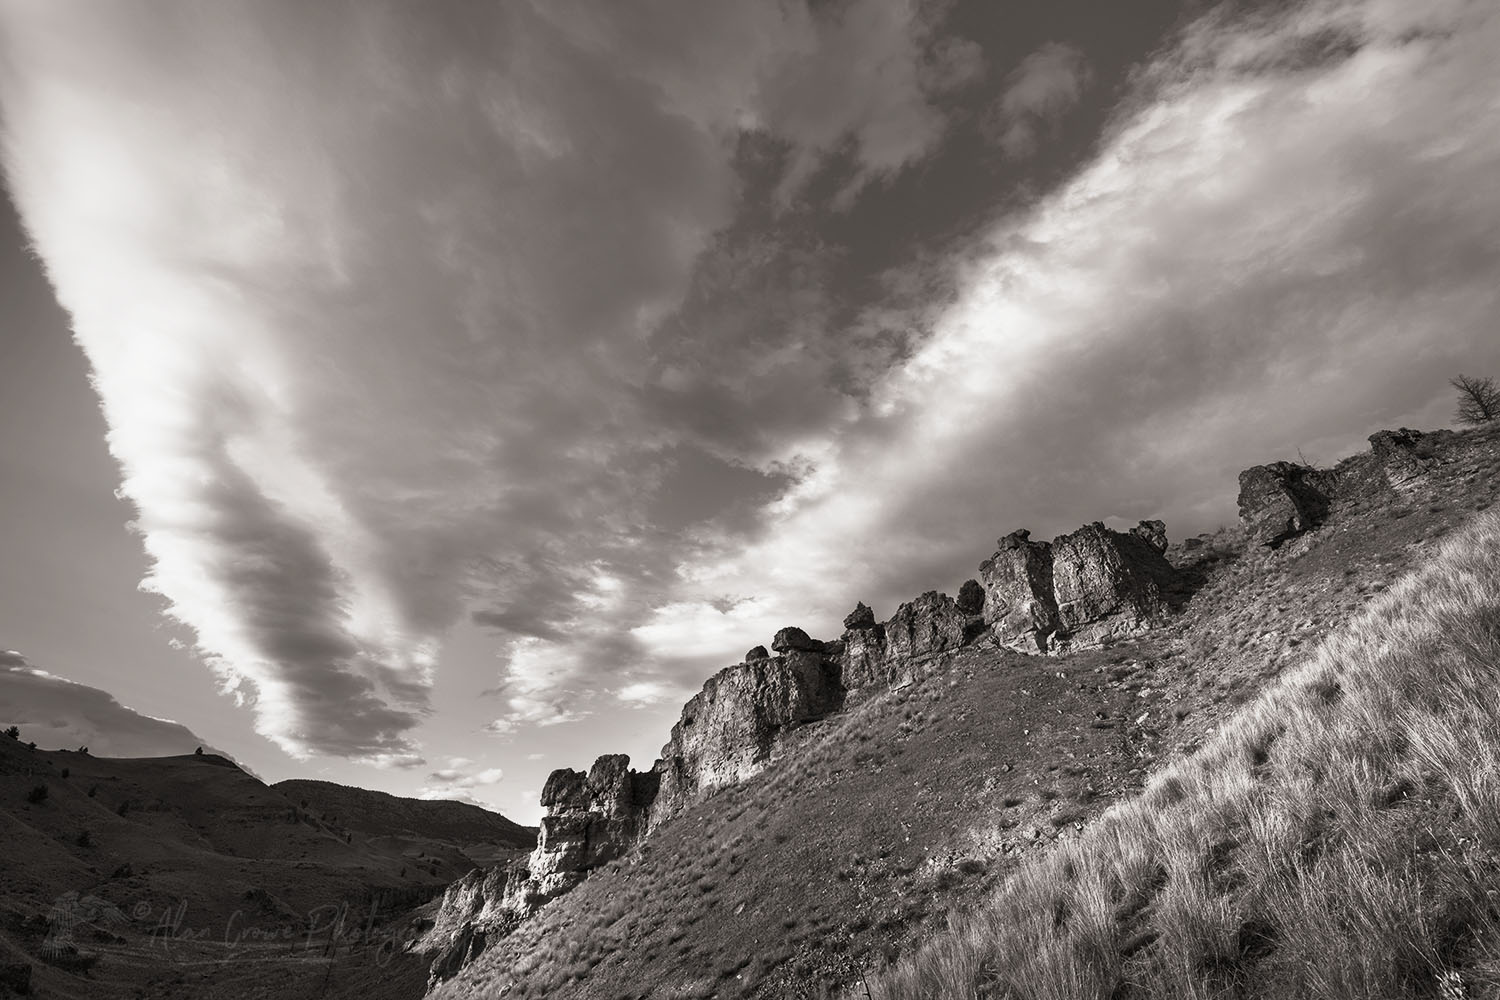 Evening clouds over Clarno Unit of John Day Fossil Beds National Monument Oregon #71299bw